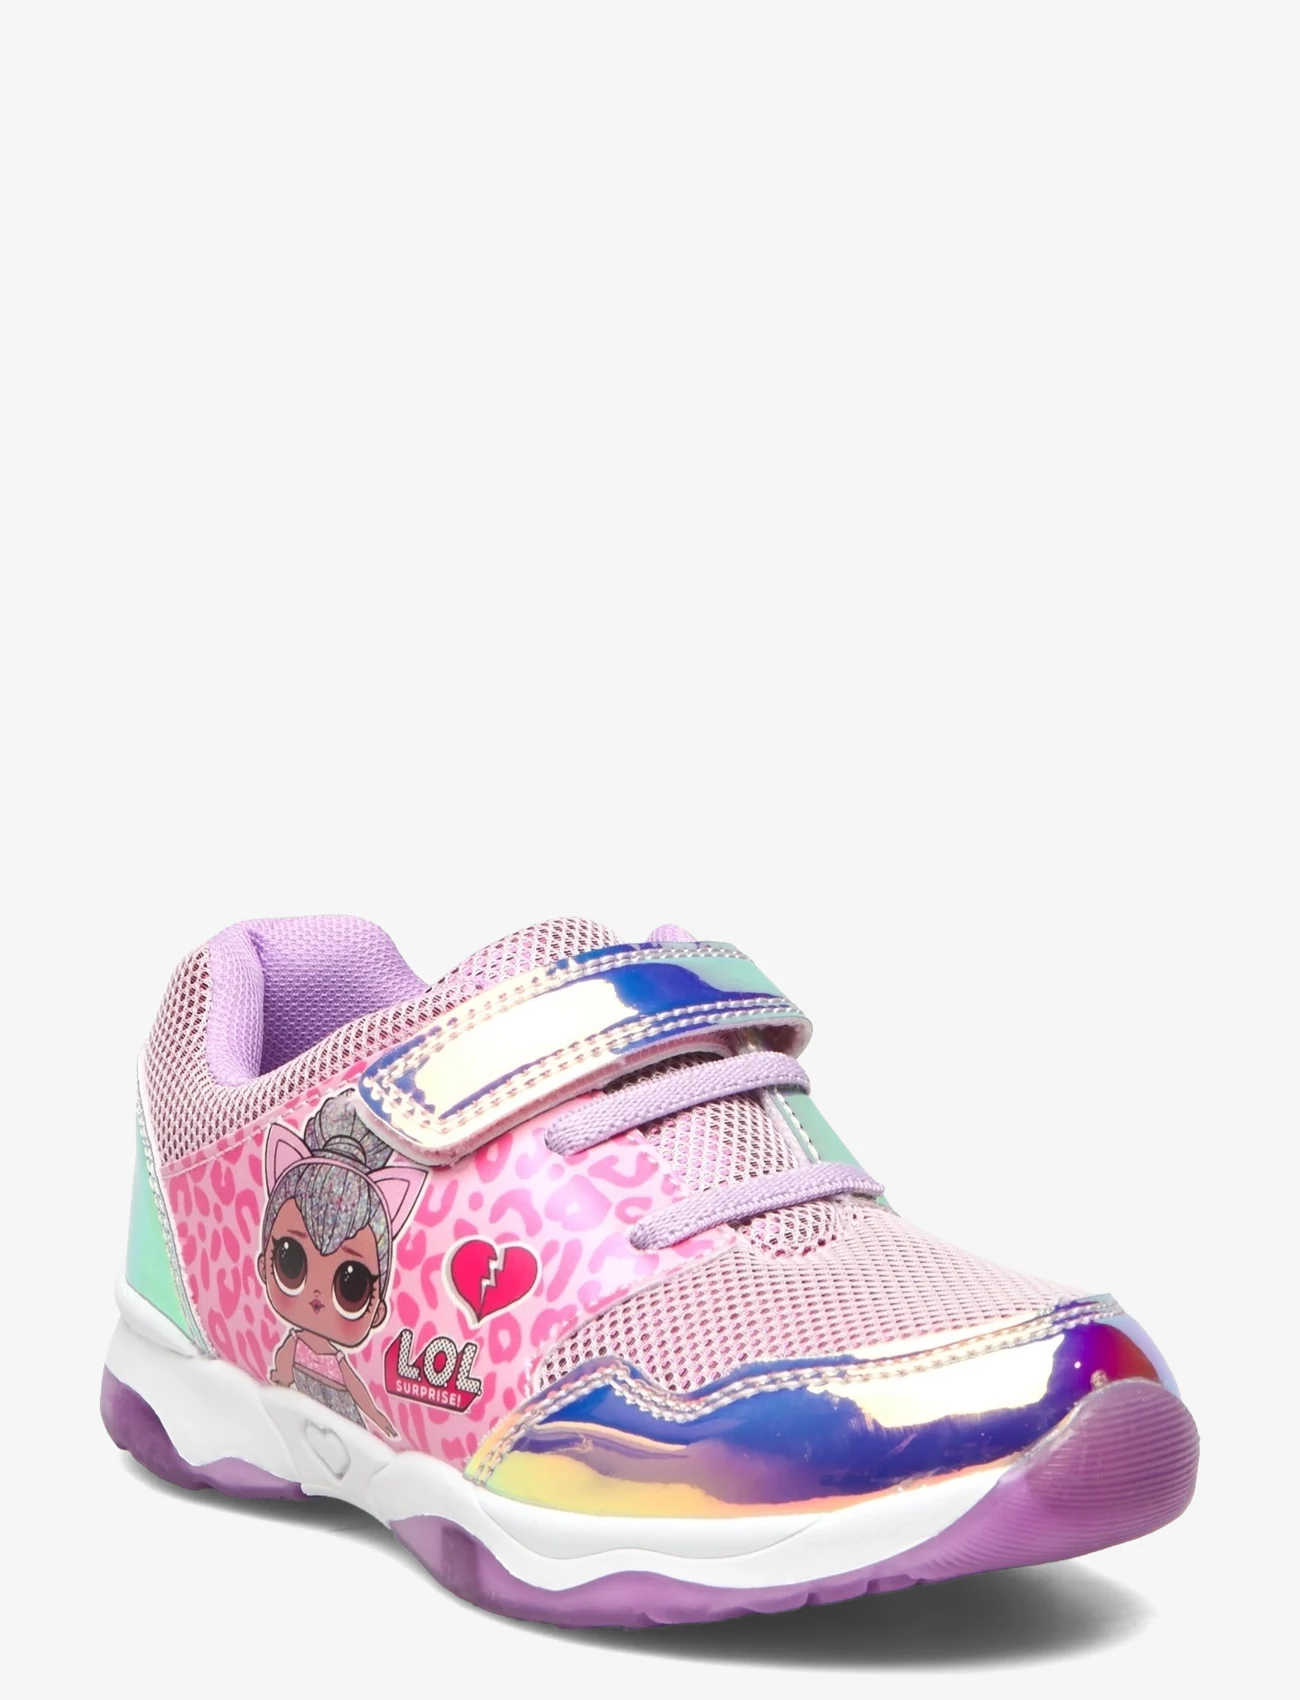 Leomil - Girls sneakers - sommerschnäppchen - pink/lilac - 0